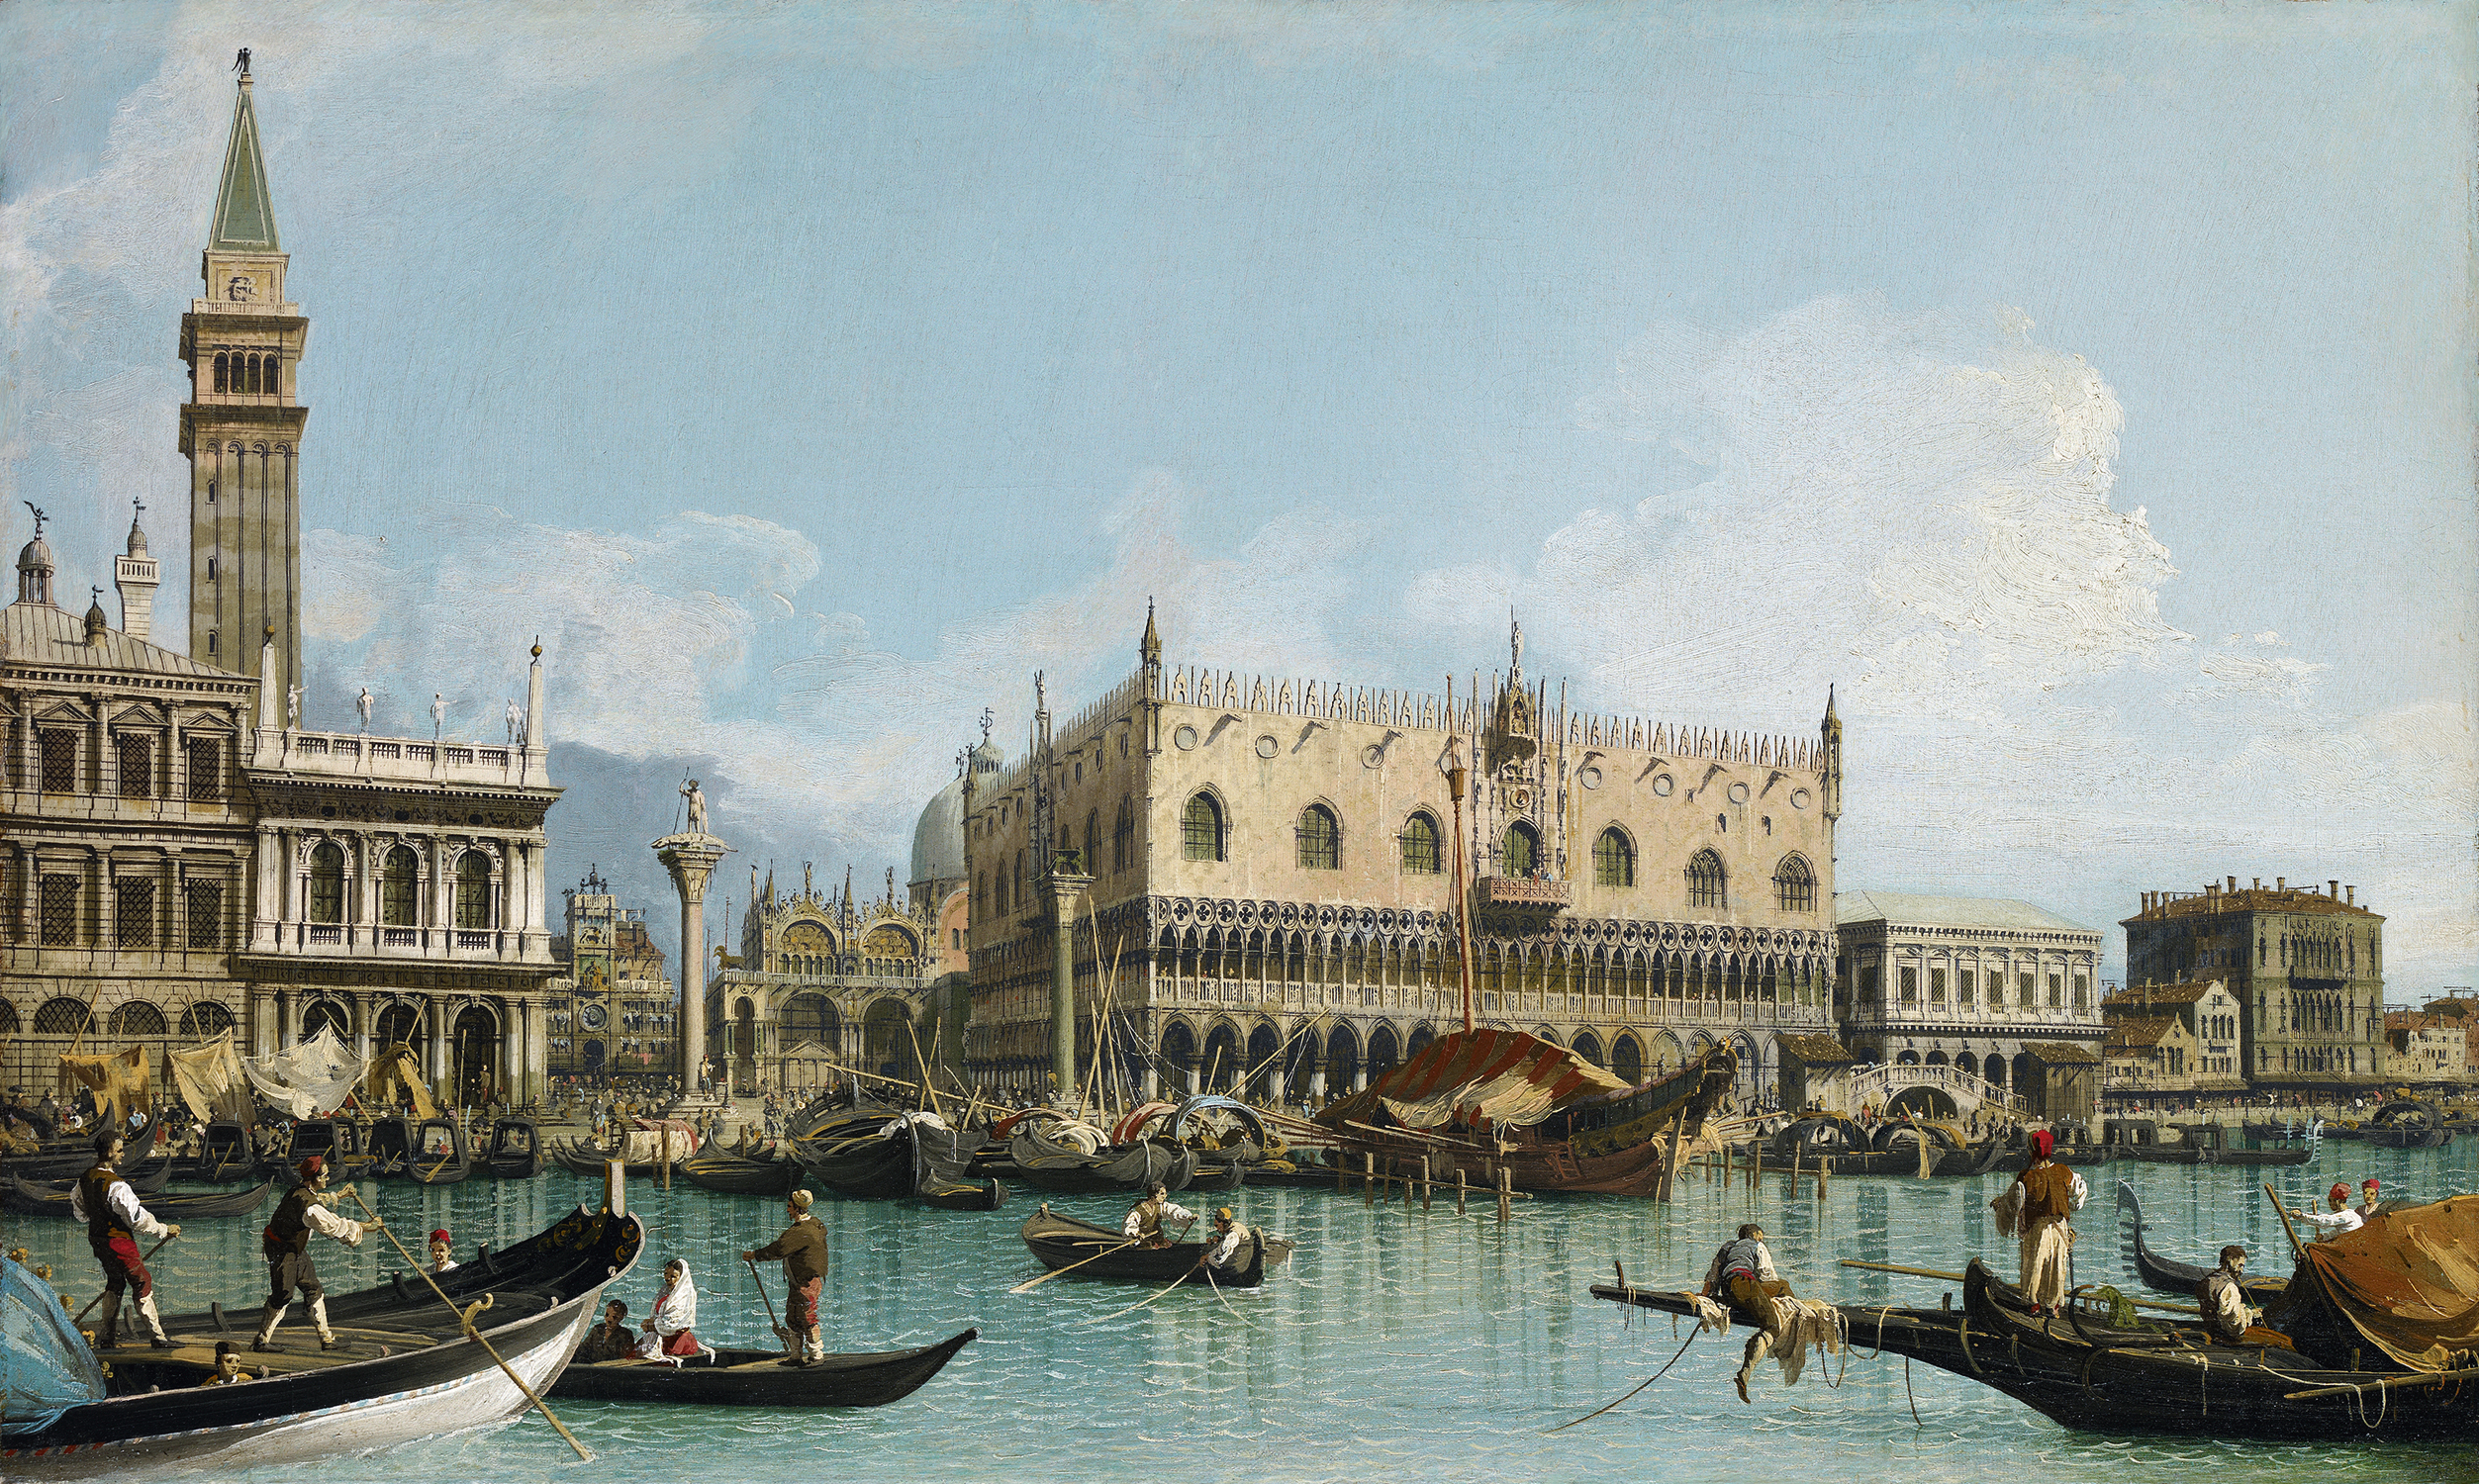 Giovanni Antonio Canal, called “Canaletto” (Italian, 1697-1768), The Pier of Venice Next to St. Mark’s Square, c. 1729. Oil on canvas. P678 – 11/2002, Archive Abelló Collection (Joaquín Cortés)